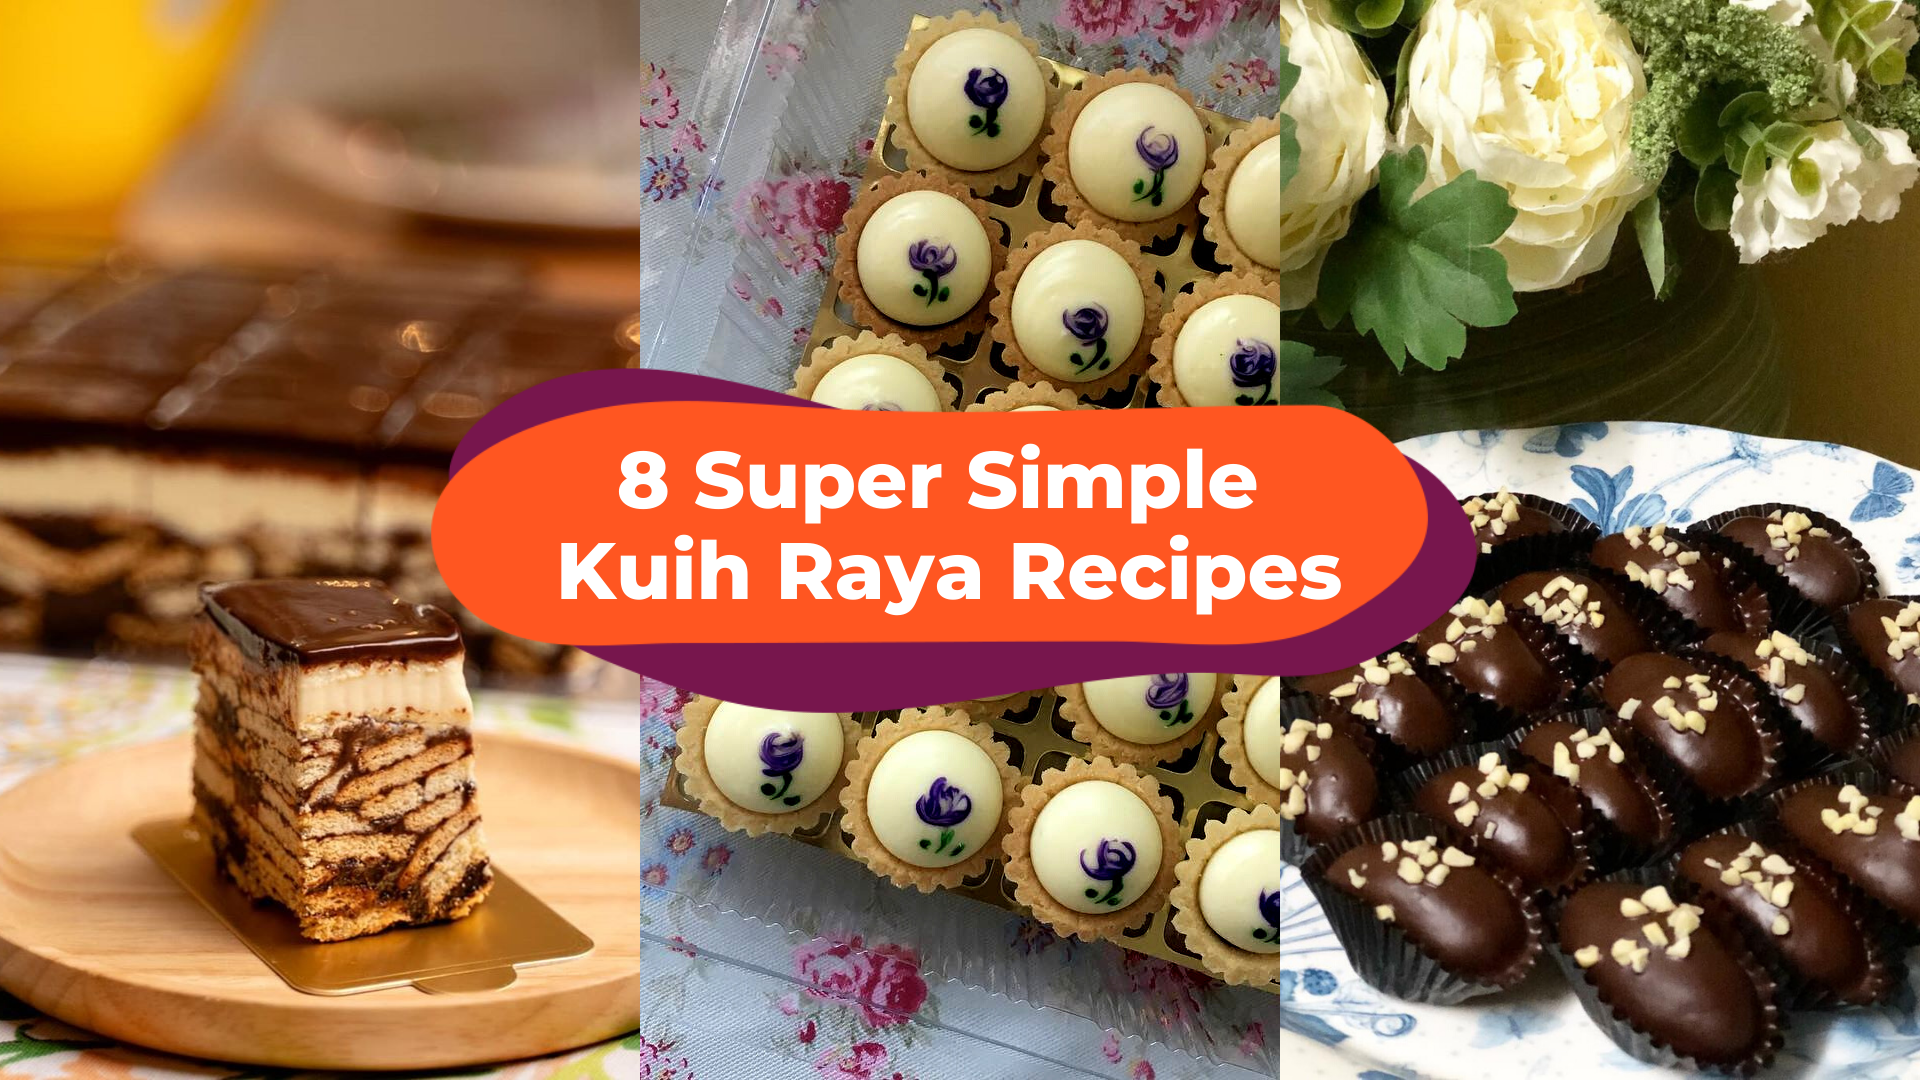 8 Easy Kuih Raya Recipes - No Complicated Ingredients Or 